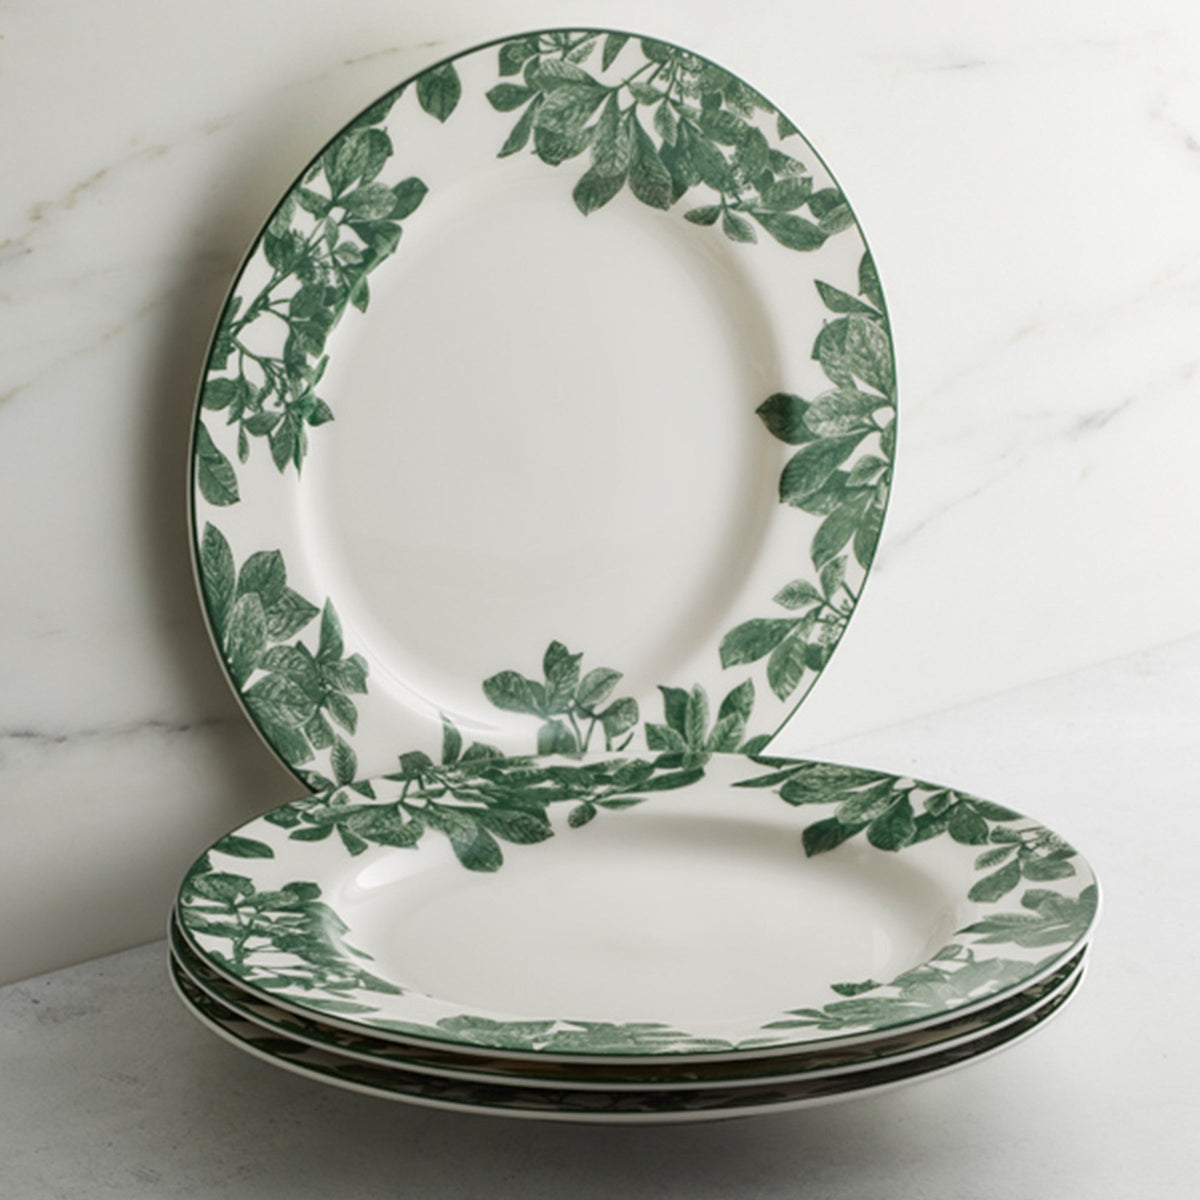 A stack of three premium Caskata Arbor Green Rimmed Dinner Plates, adorned with green foliage patterns along the rim, with one additional plate showcasing its botanical details resting upright behind the stack.